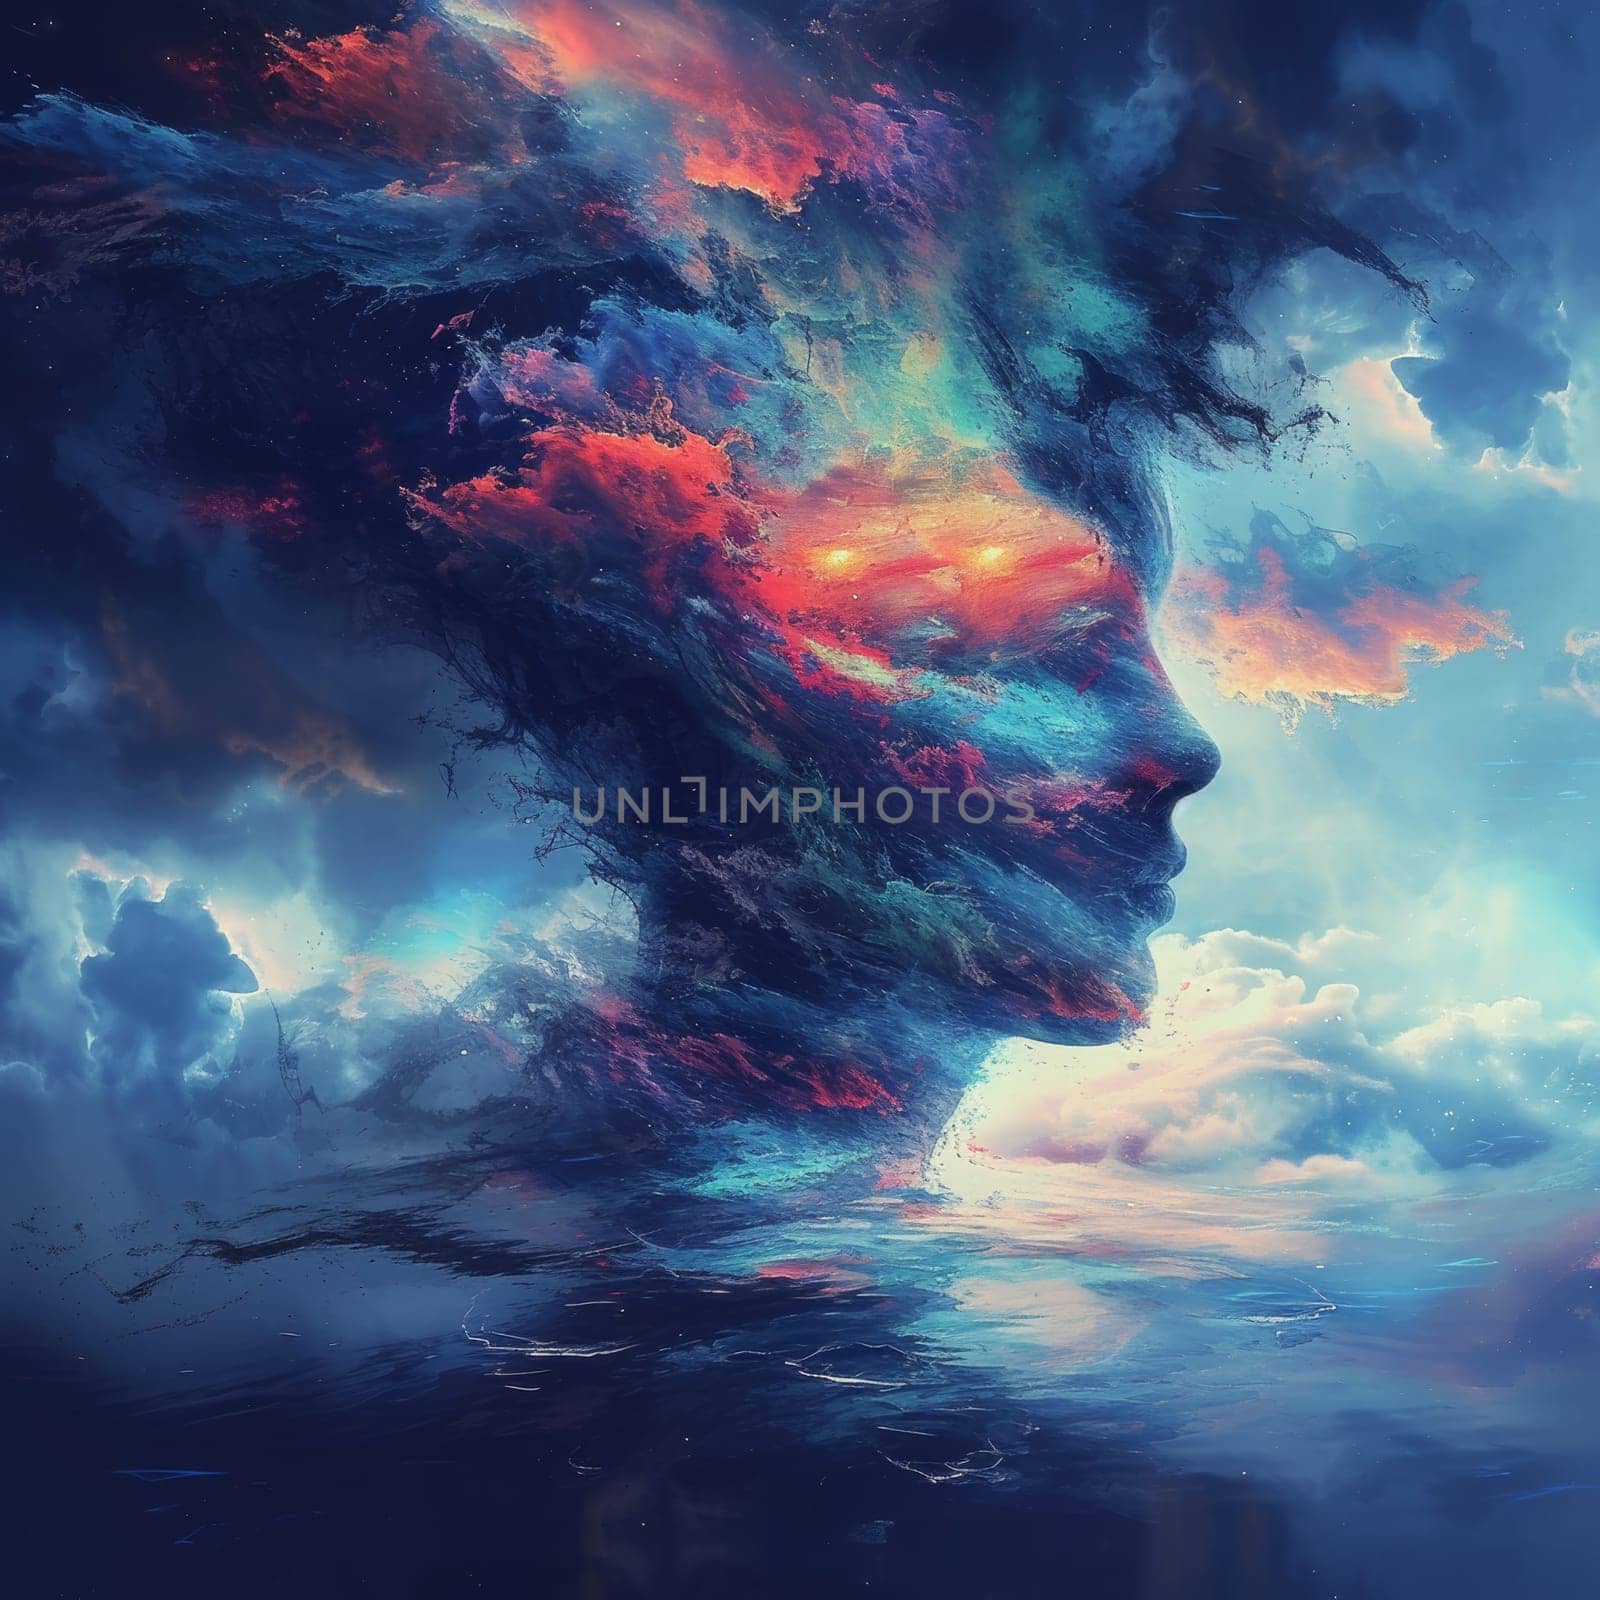 A woman's face is shown in a painting with colorful clouds, AI by starush